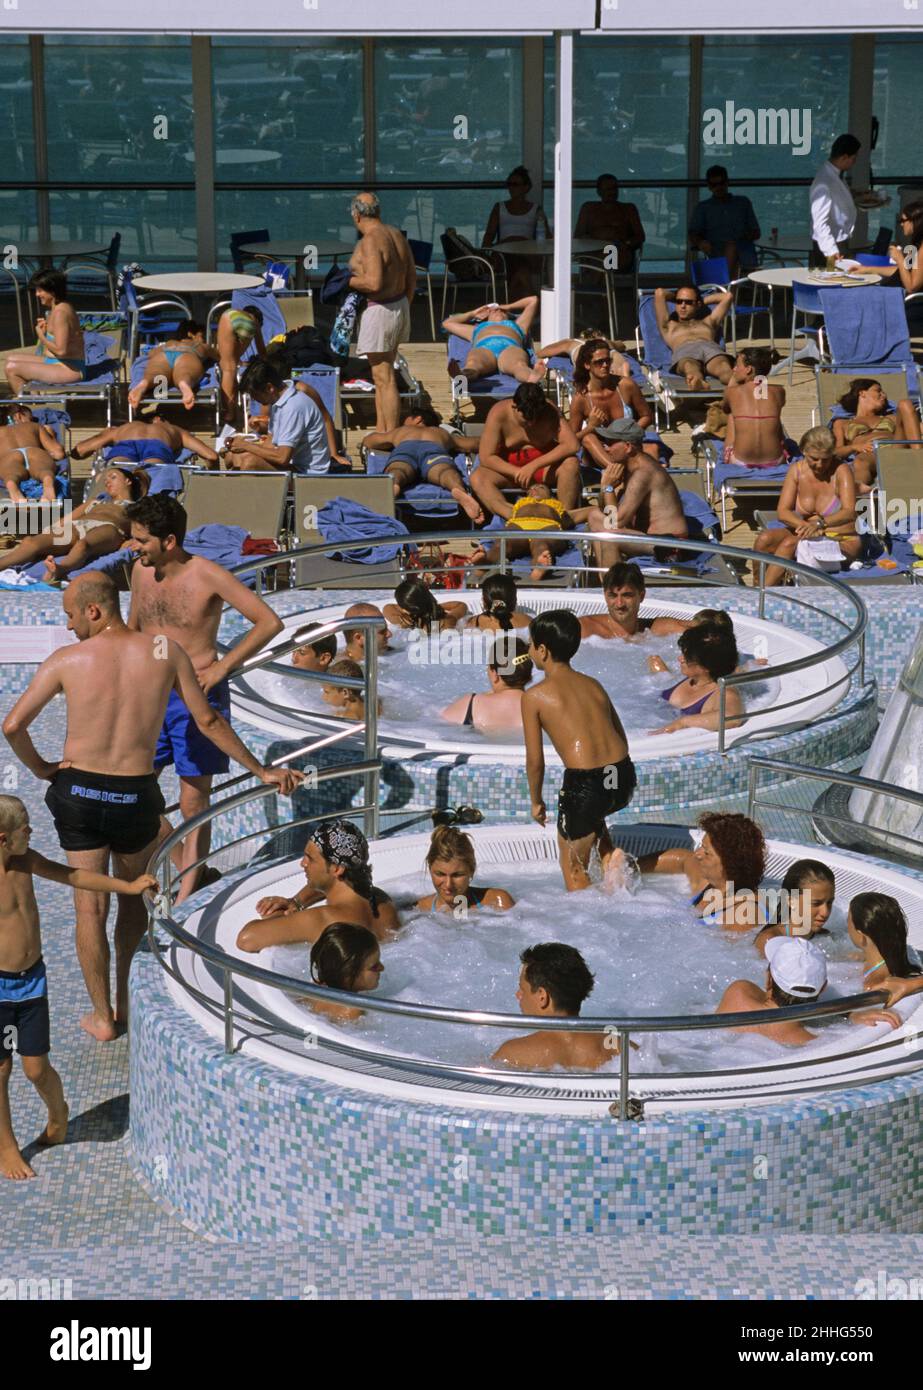 passengers on the swimming pool sun deck of a cruise ship Stock Photo